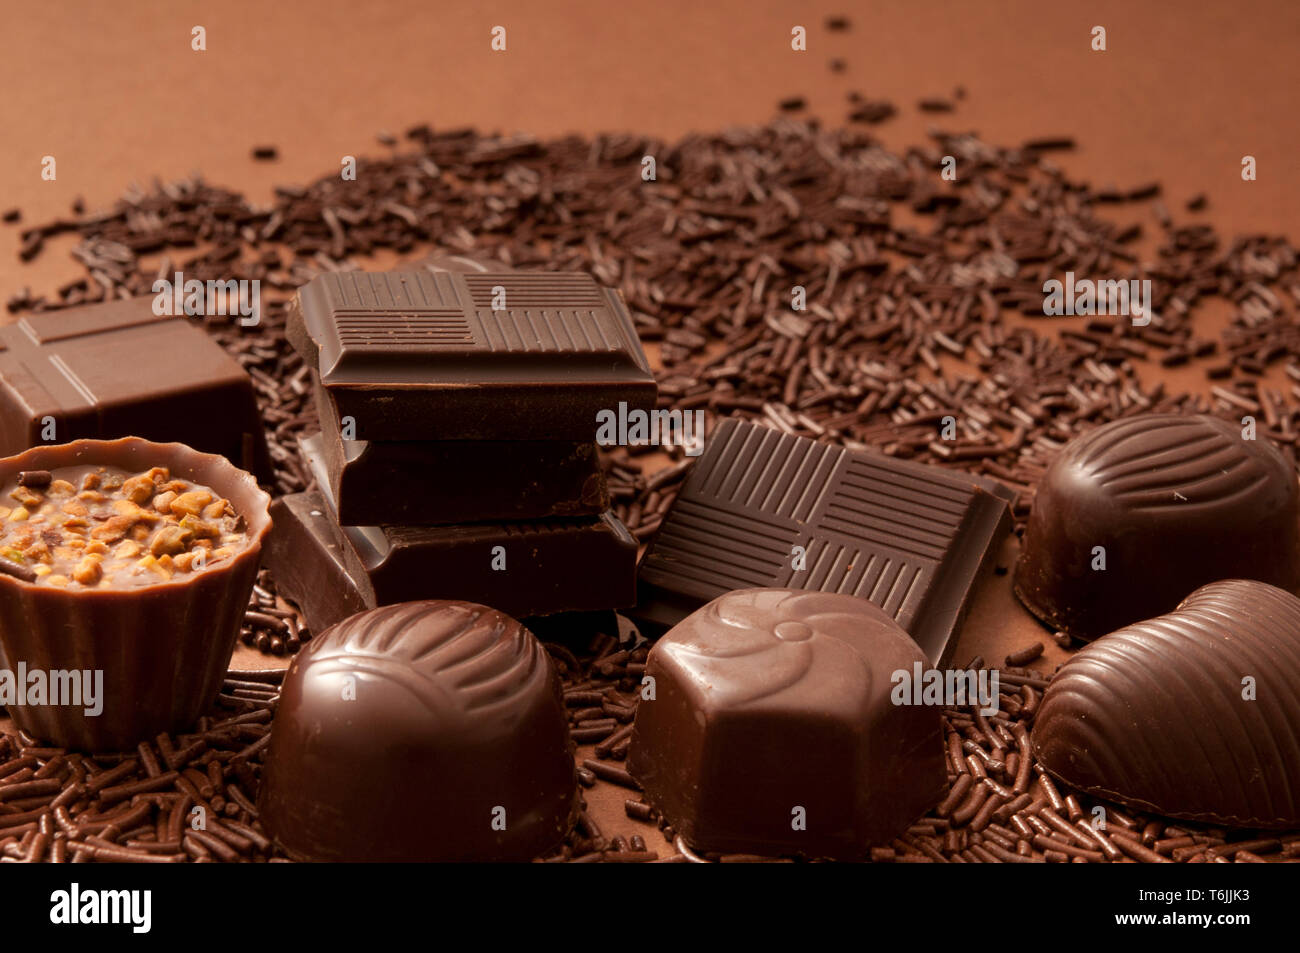 variety of chocolate bonbons and pralines Stock Photo